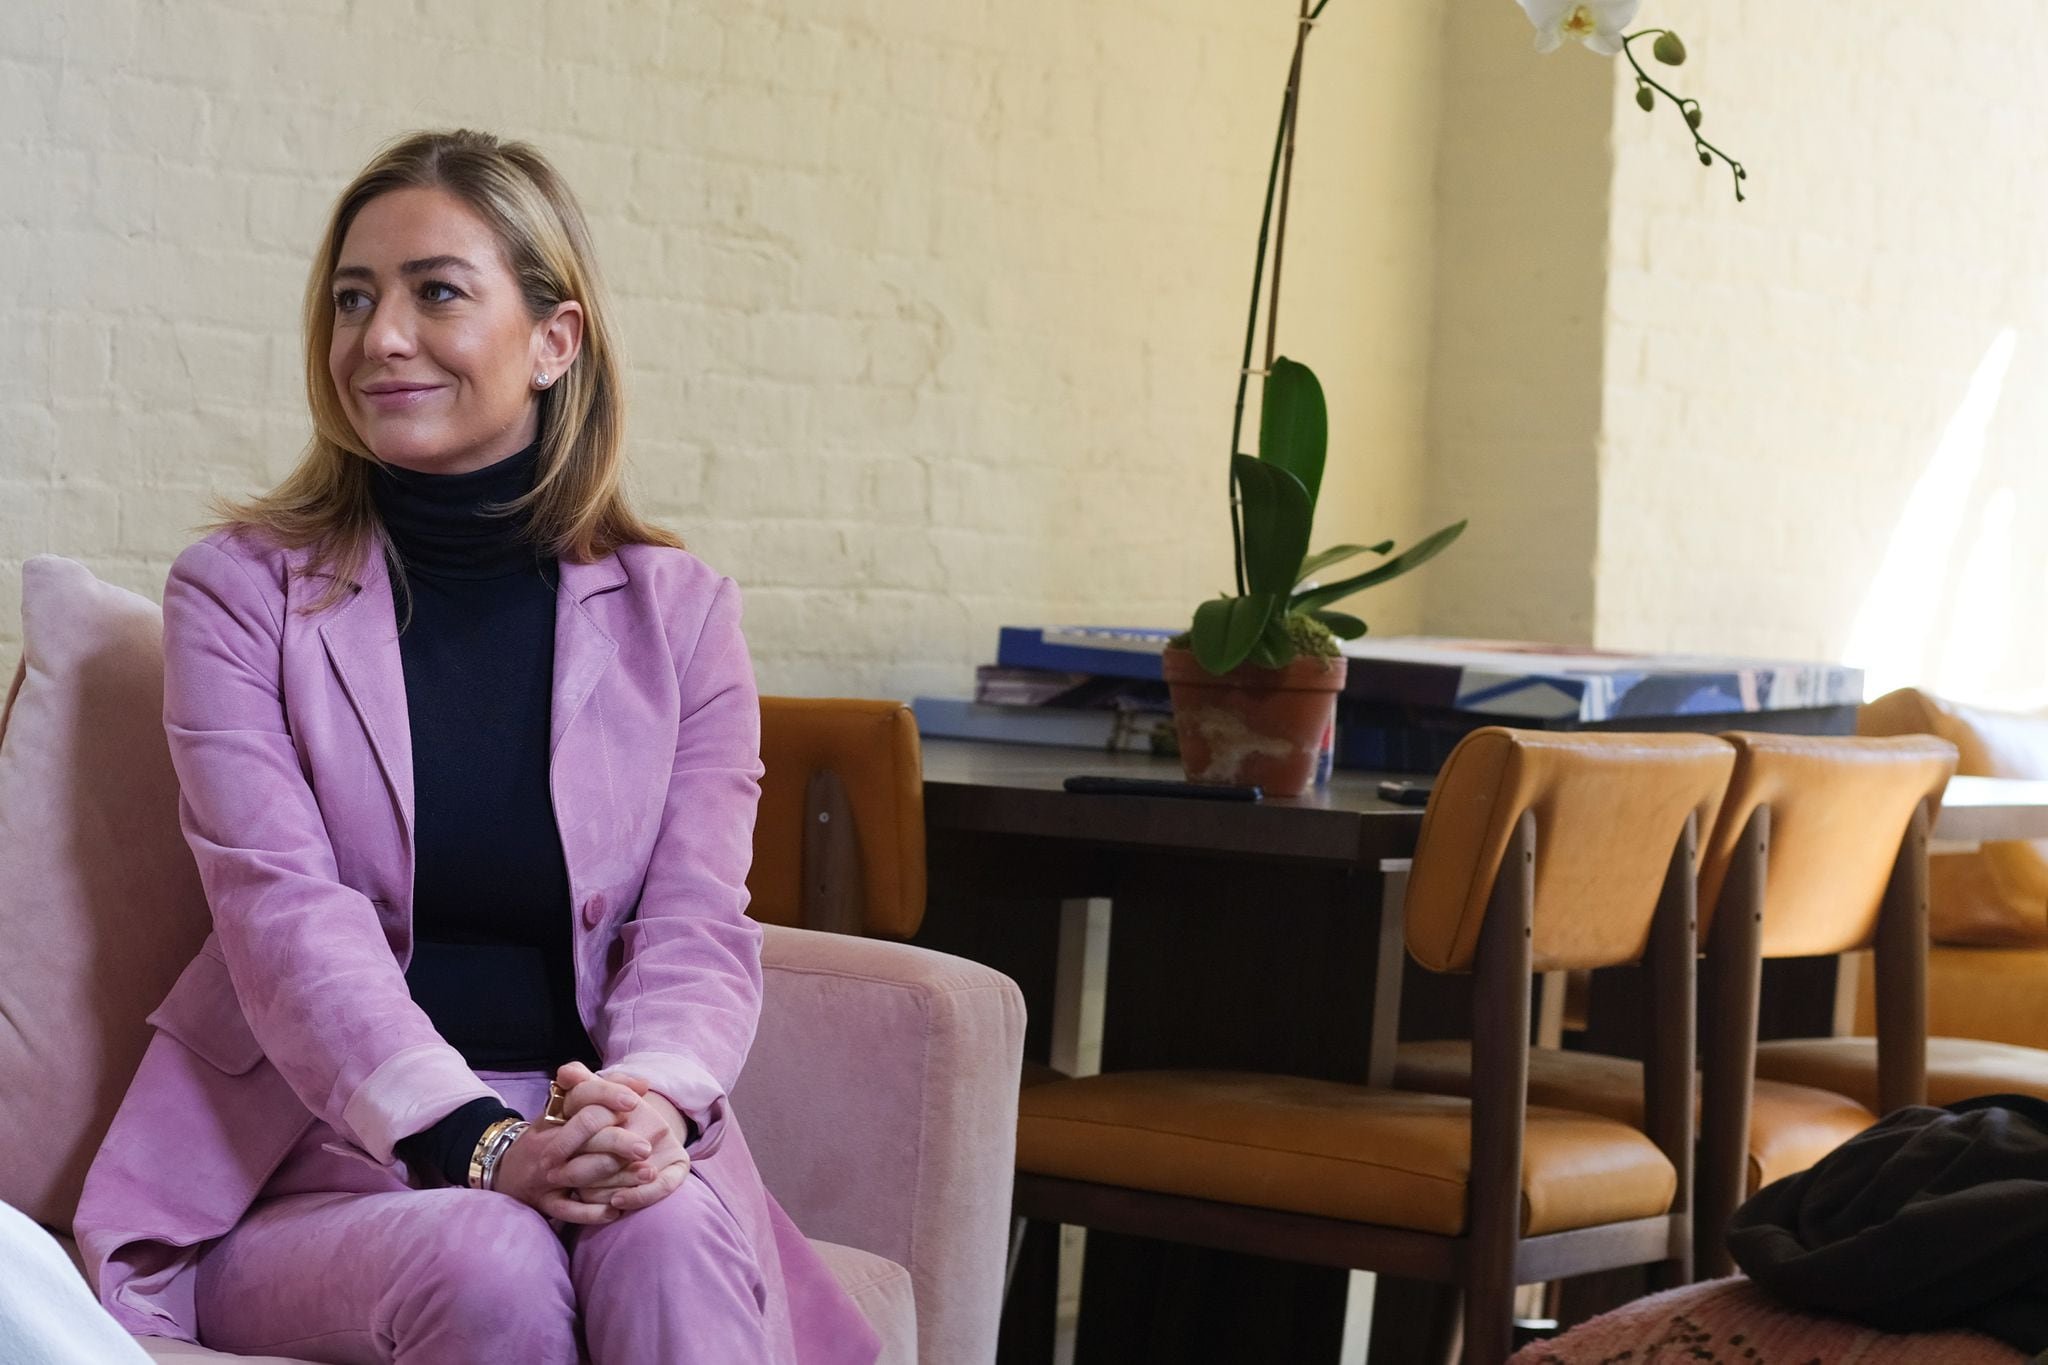 Bumble gave women more power in dating. Now the app is giving women power in the boardroom.